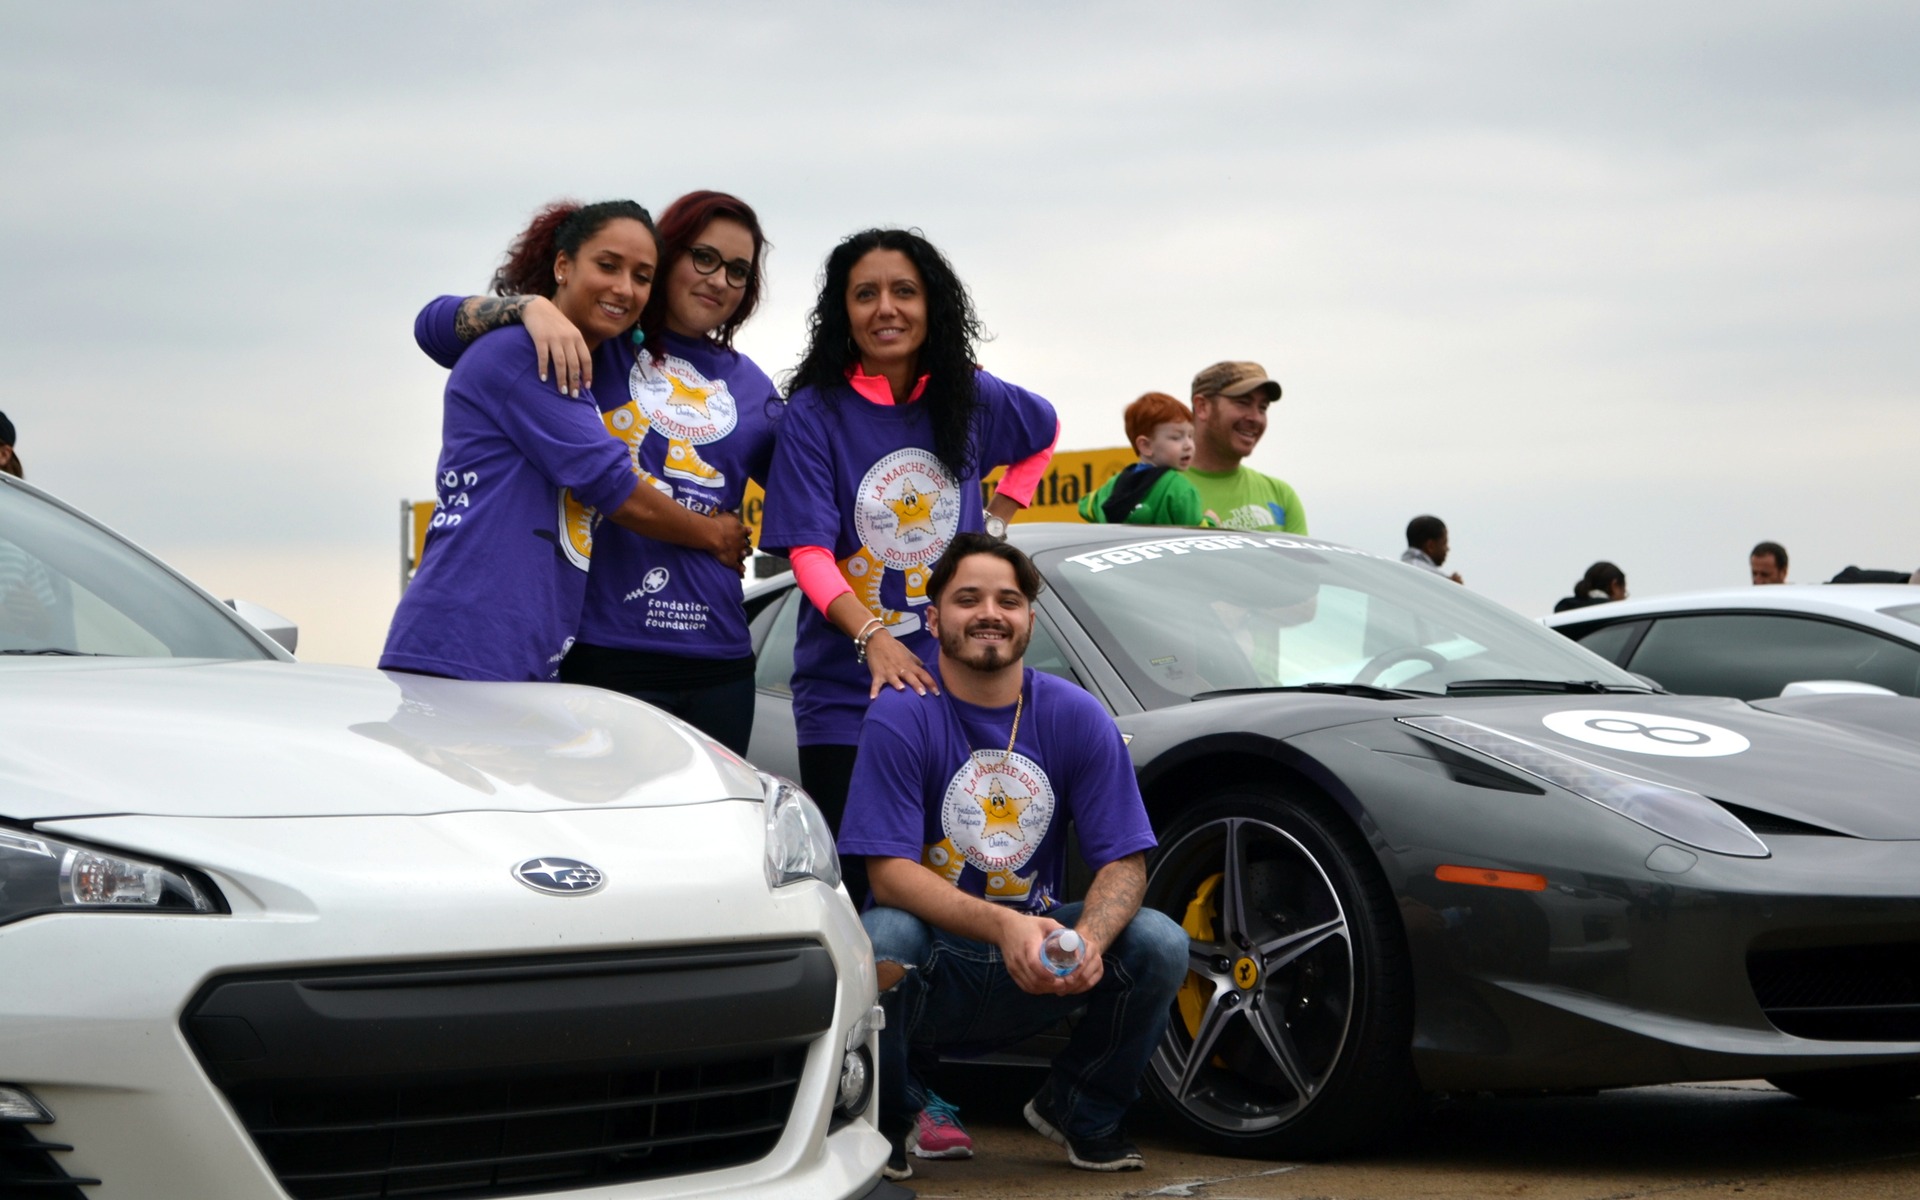  The Drive for Smiles event had a lot of people grinning from ear to ear!